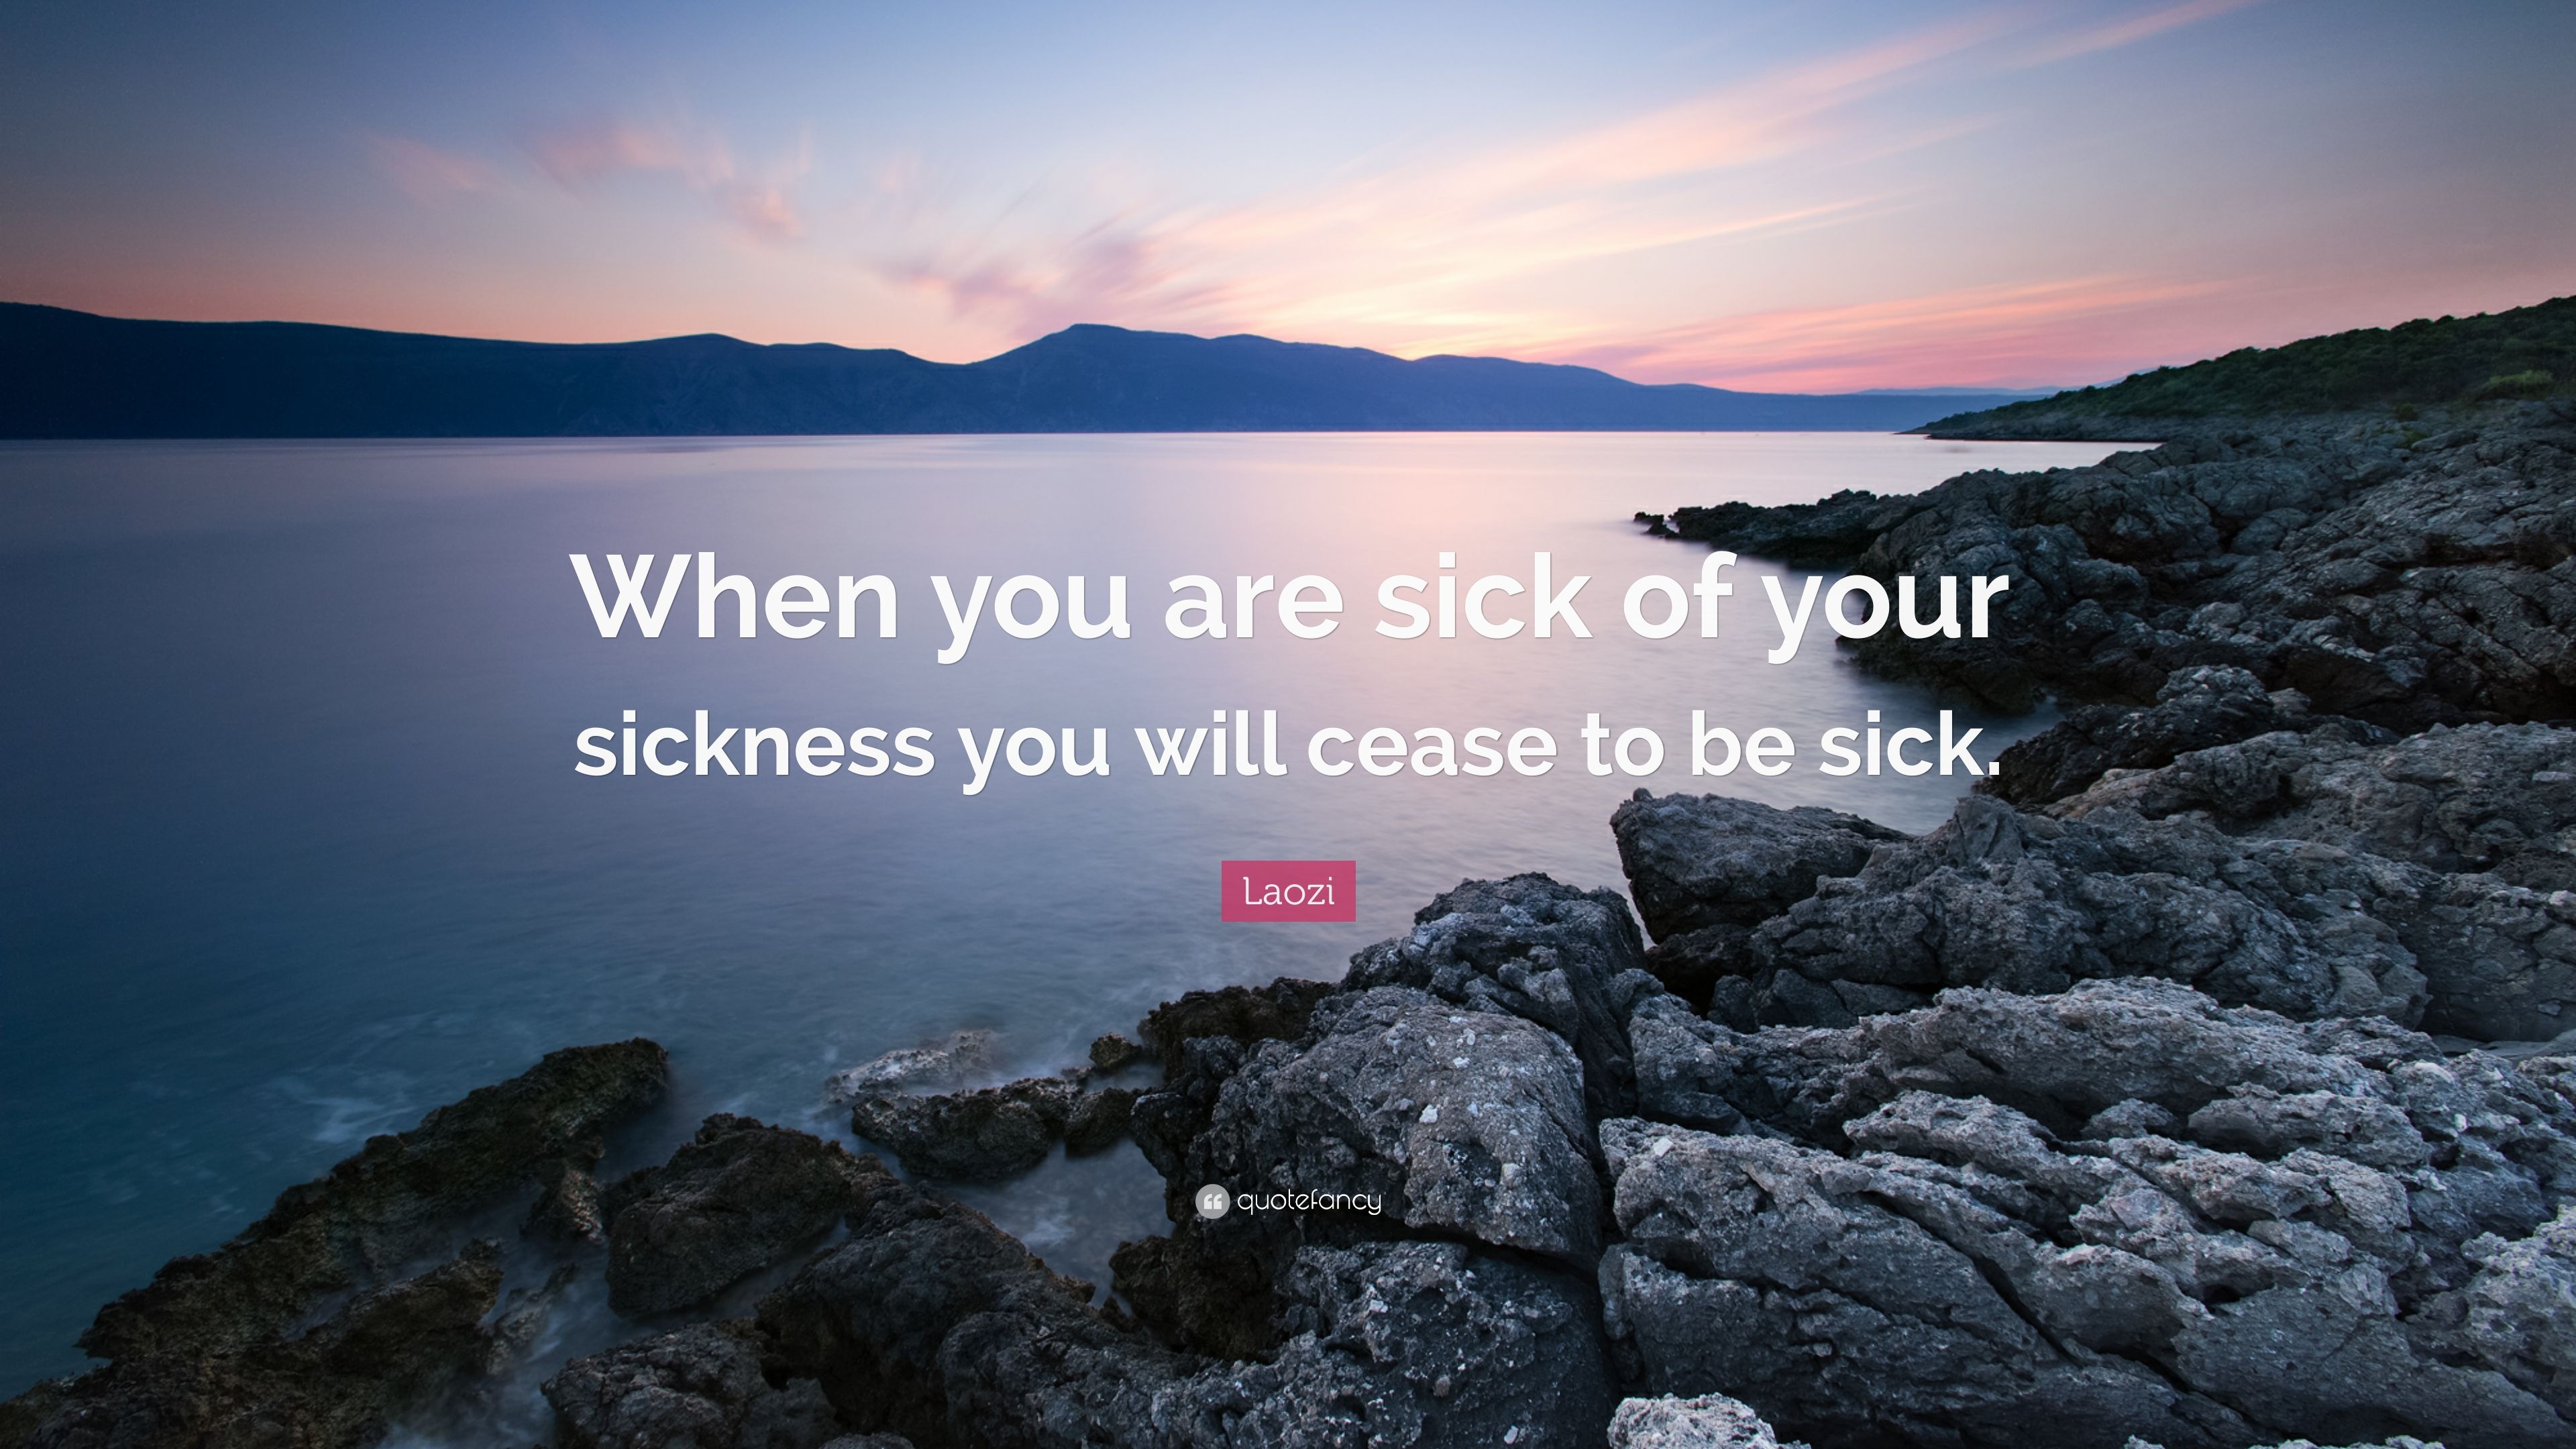 Laozi Quote: “When you are sick of your sickness you will cease to be sick.” (7 wallpaper)